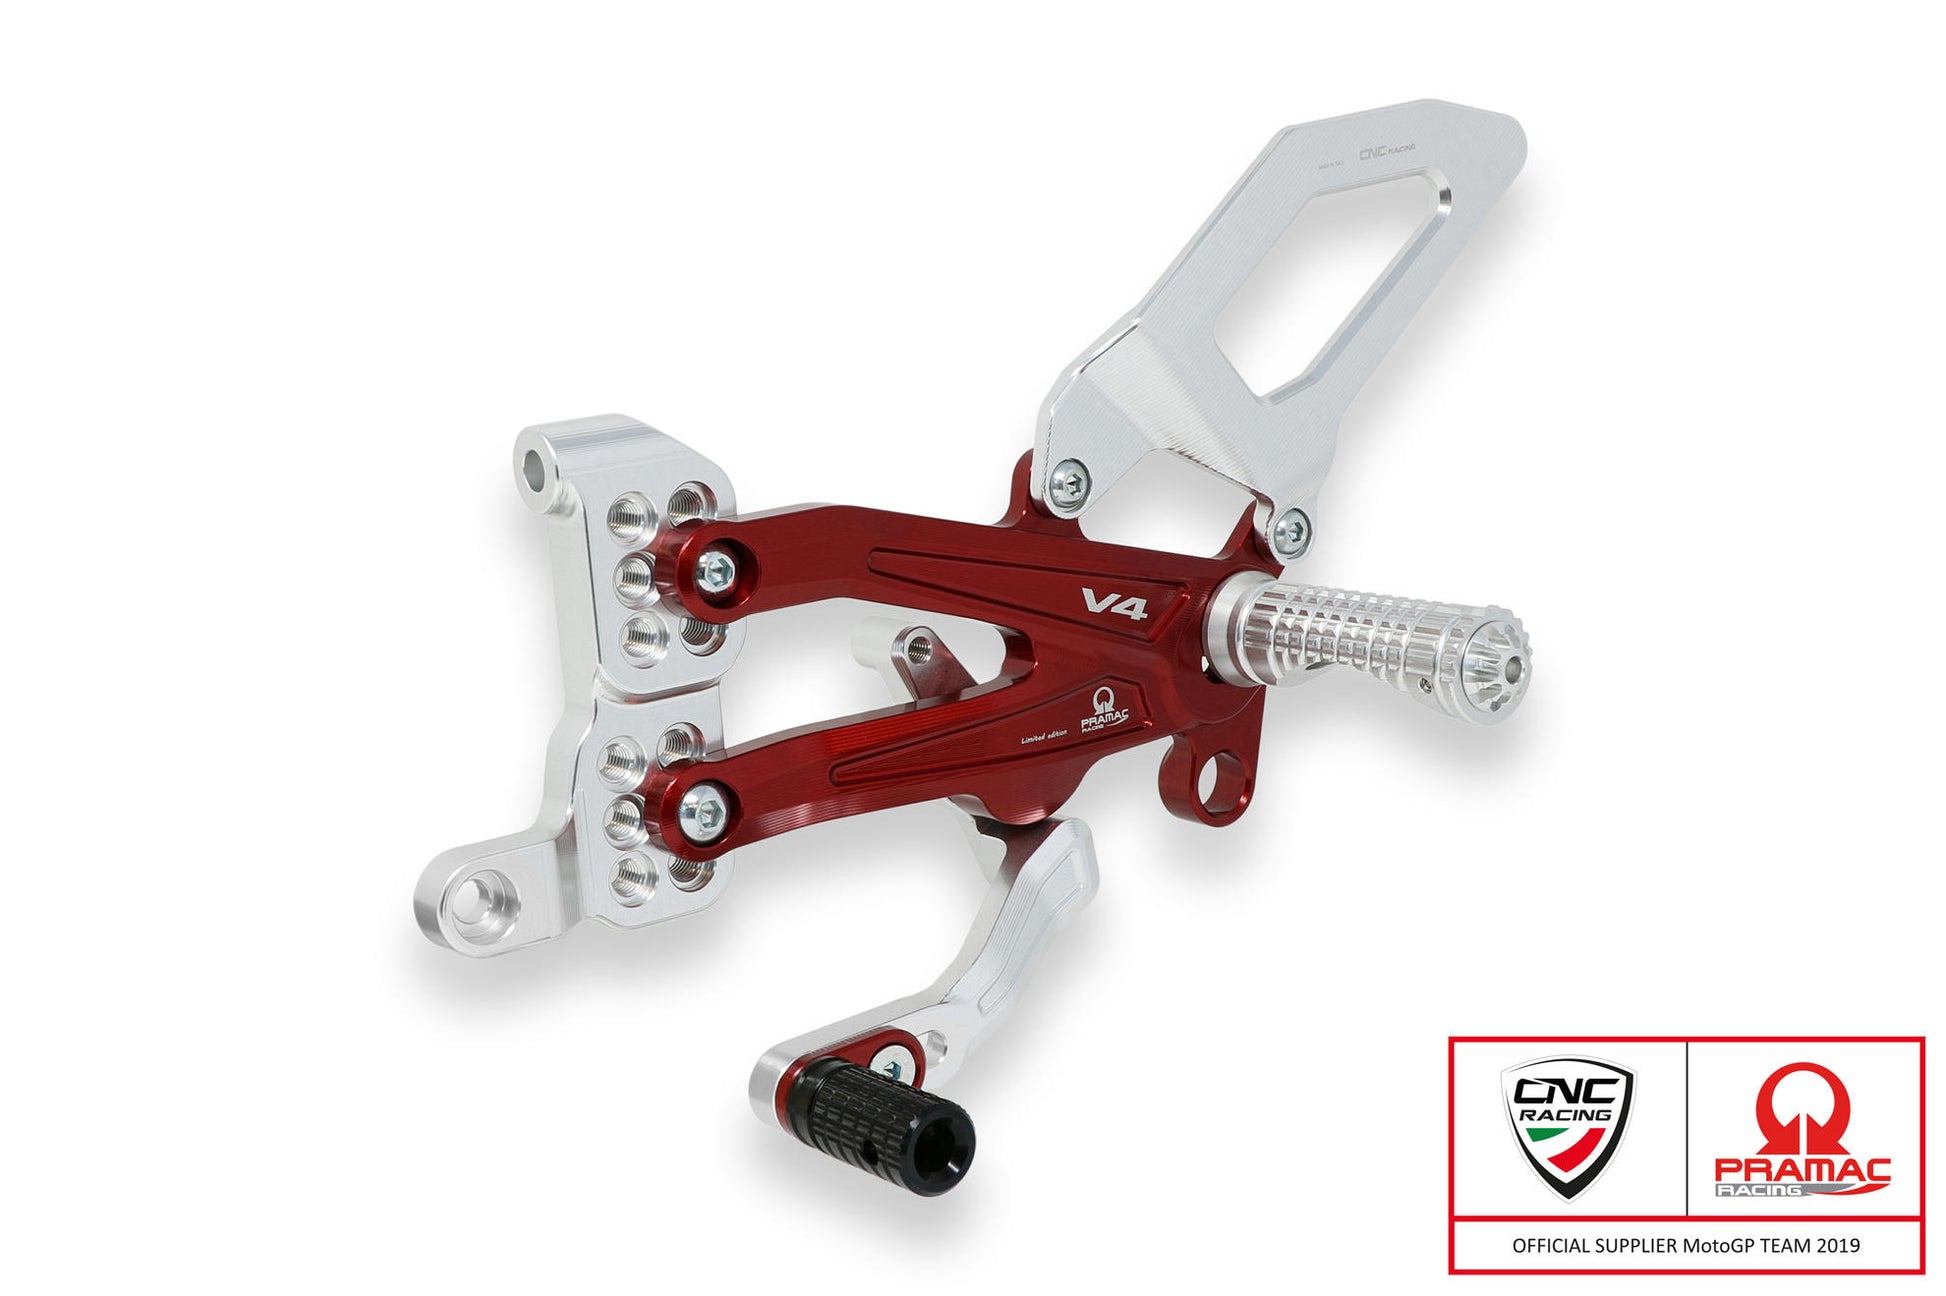 Panigale V4 - Adjustable Easy Rearsets - Averys Motorcycles